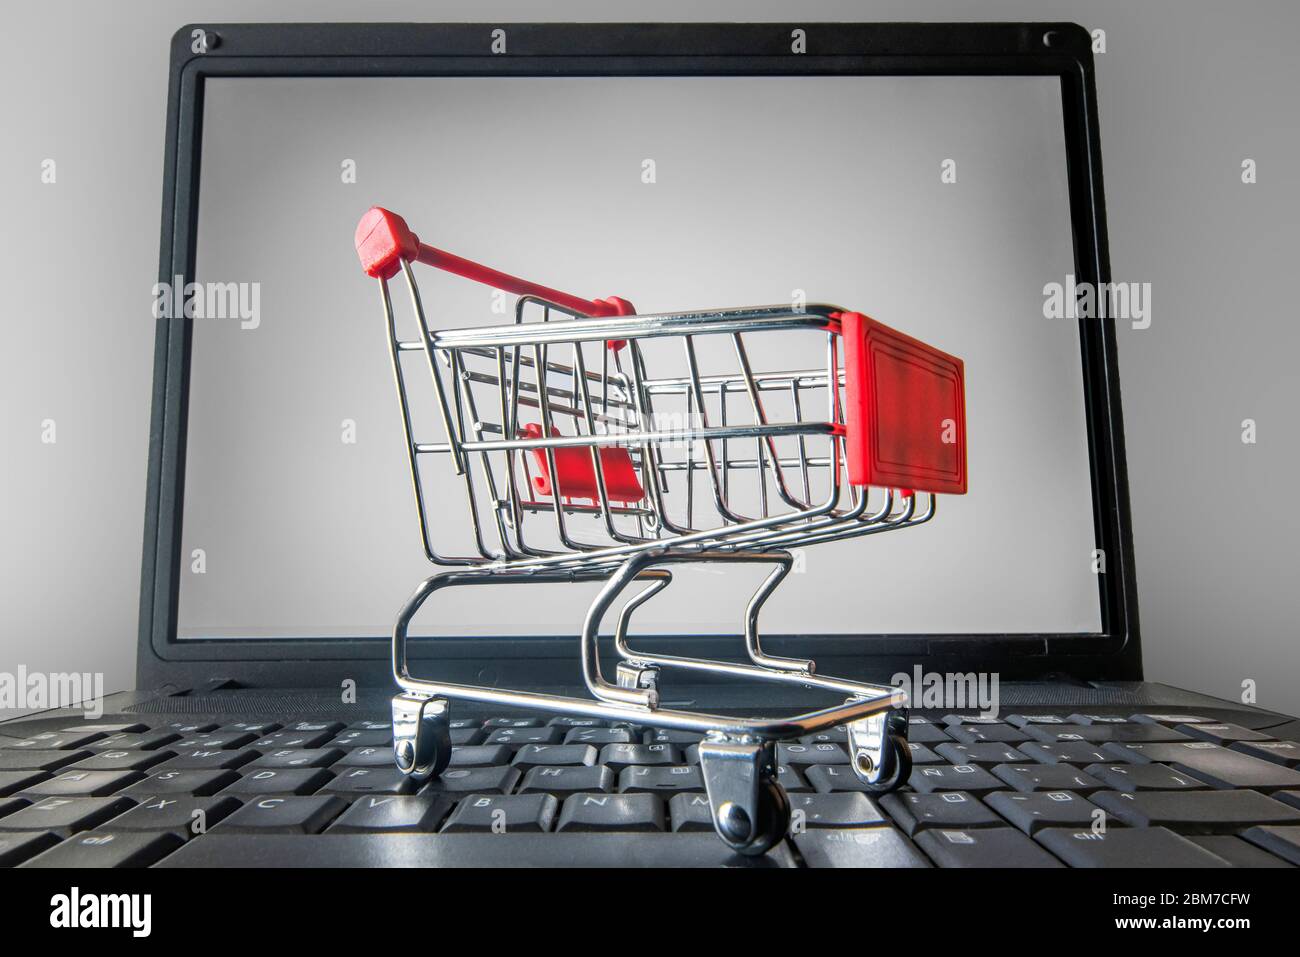 shopping cart on top of a laptop keyboard. Stock Photo